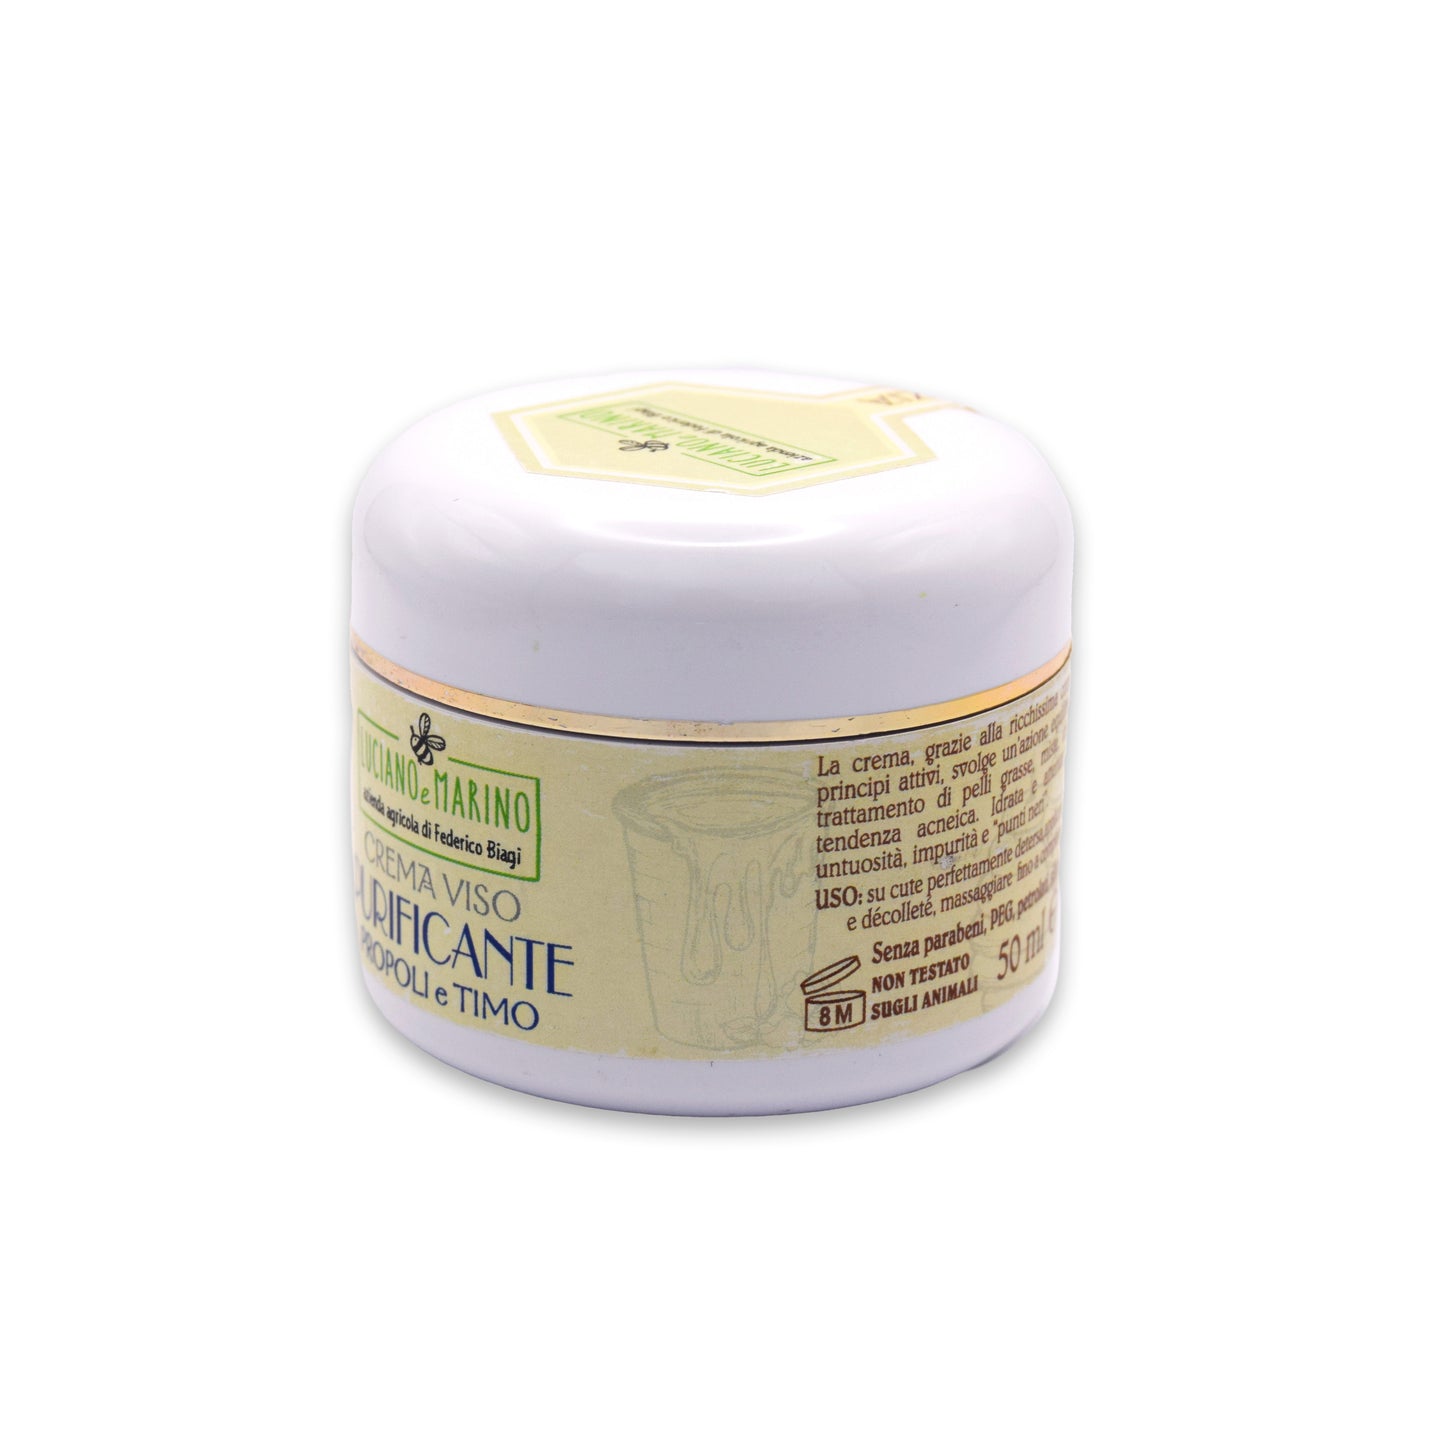 Purifying face cream with propolis and thyme - 50 ml